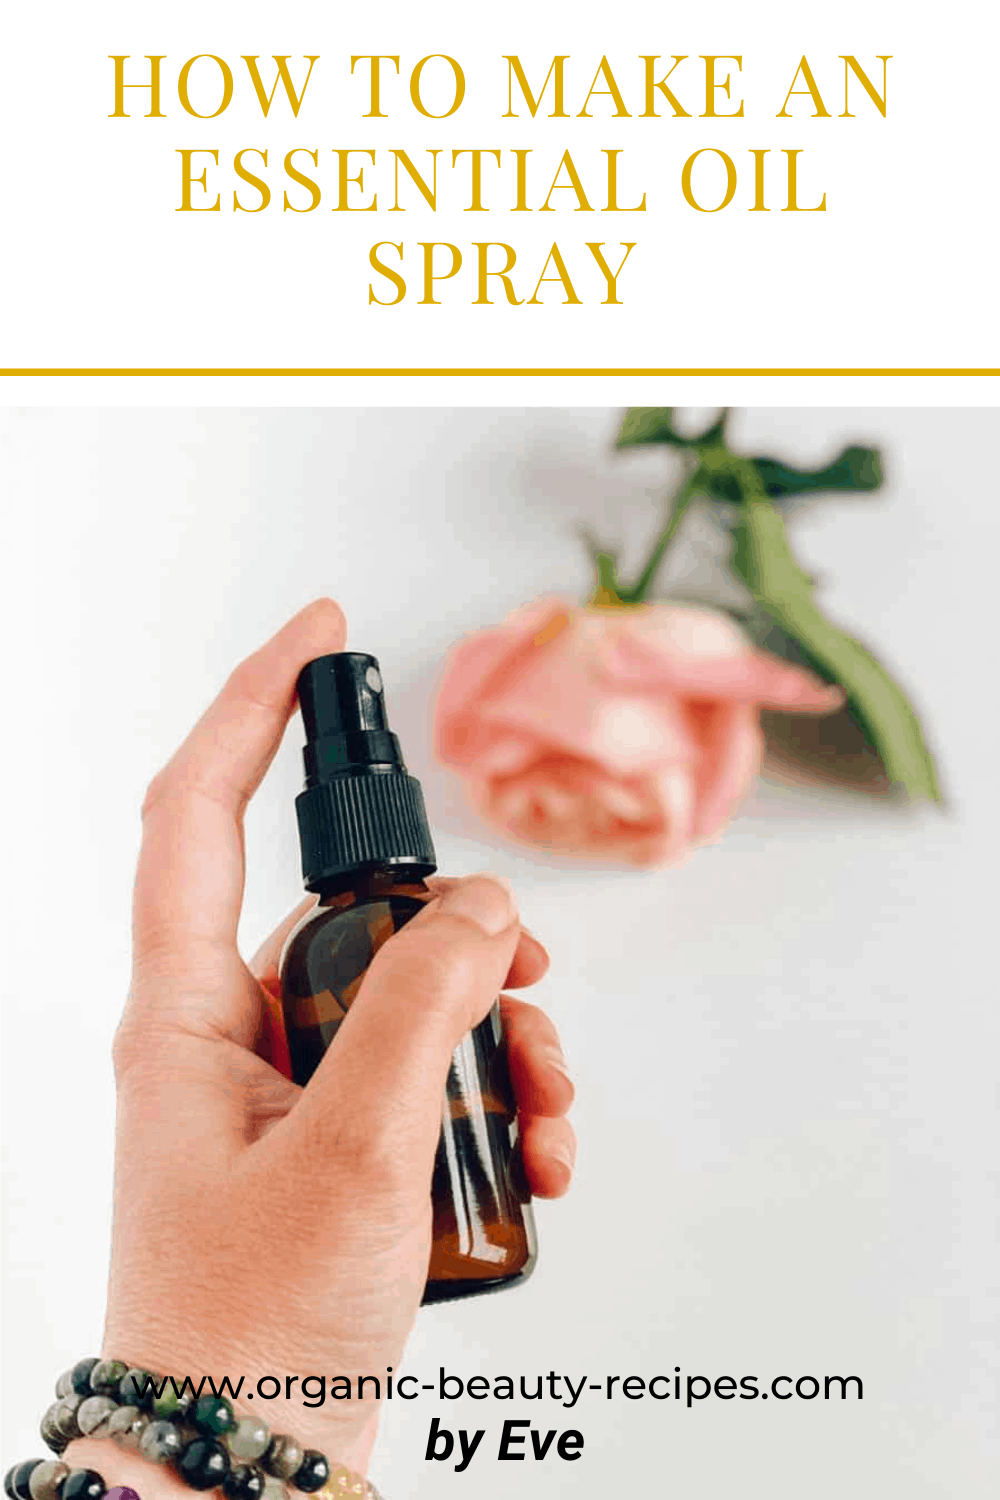 How to Make an Essential Oil Spray